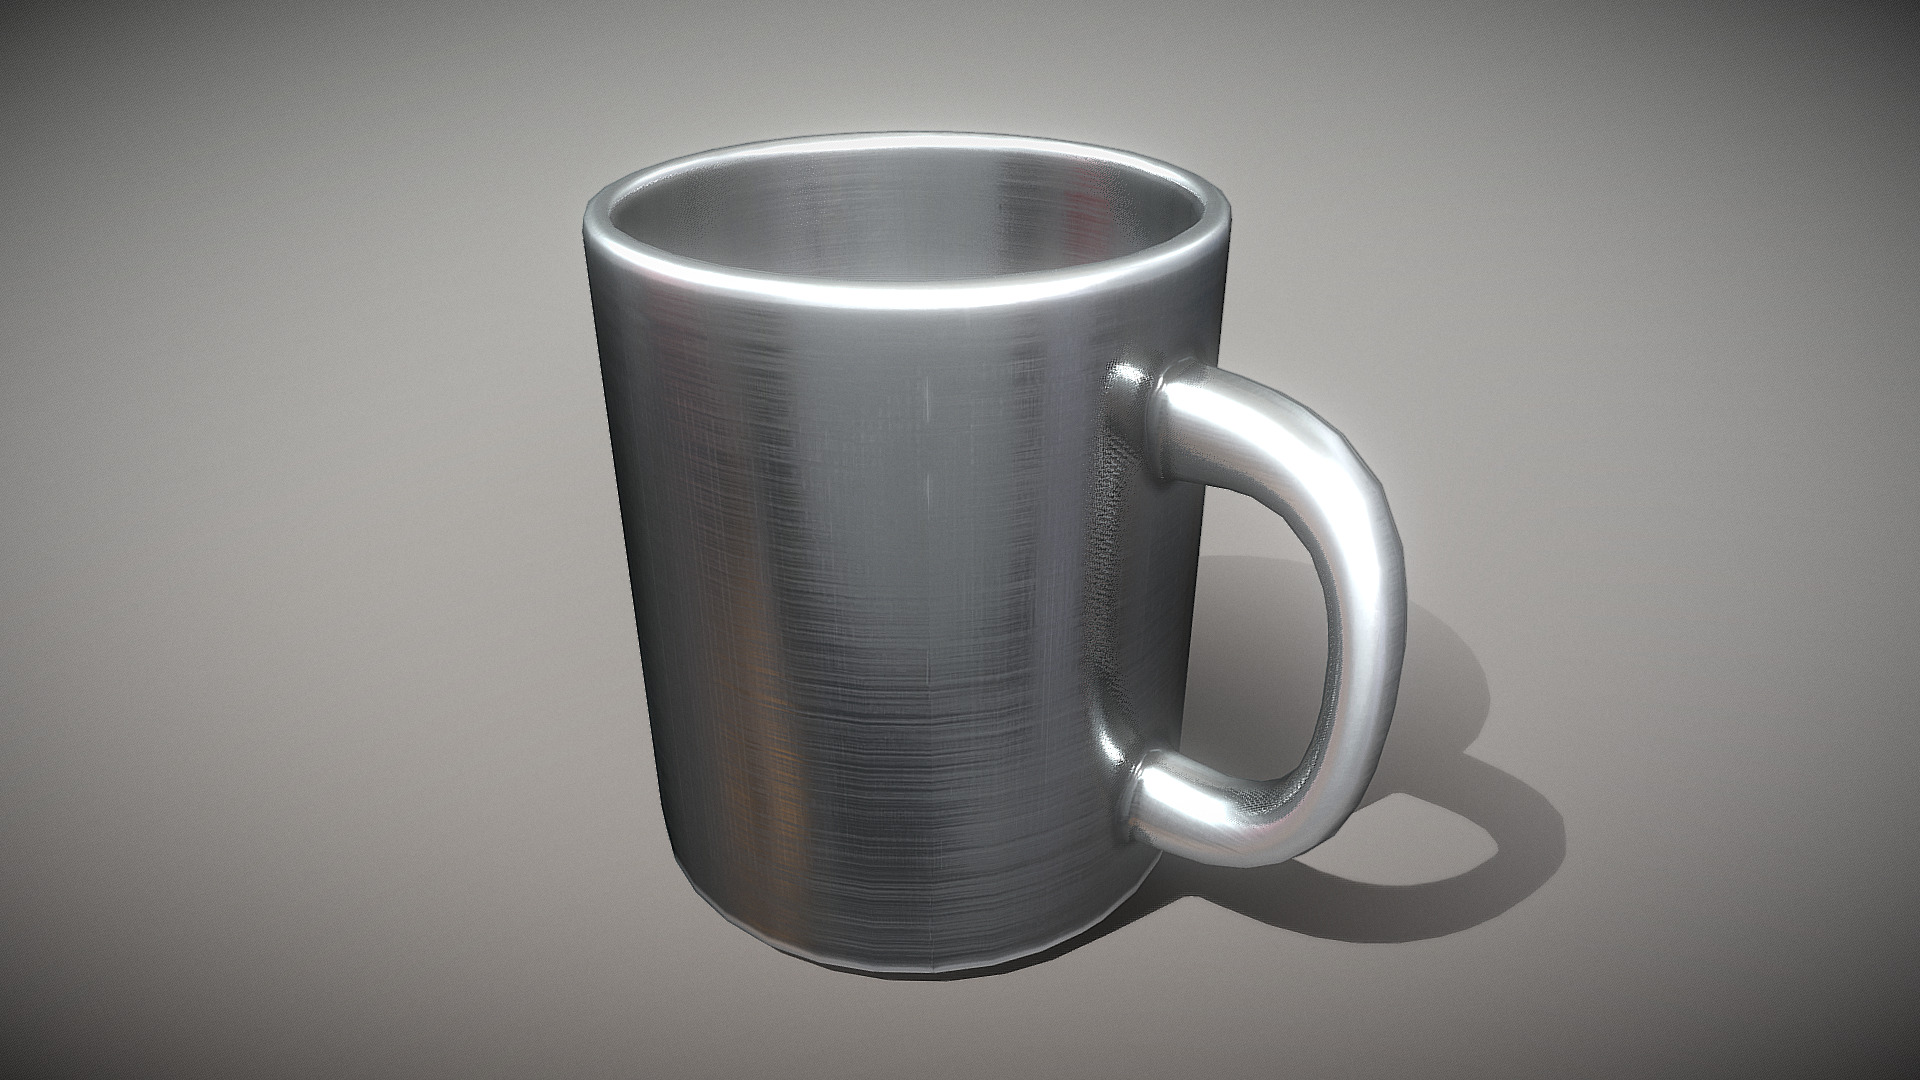 3D model Coffee Cup Alu Version - This is a 3D model of the Coffee Cup Alu Version. The 3D model is about a silver coffee mug.